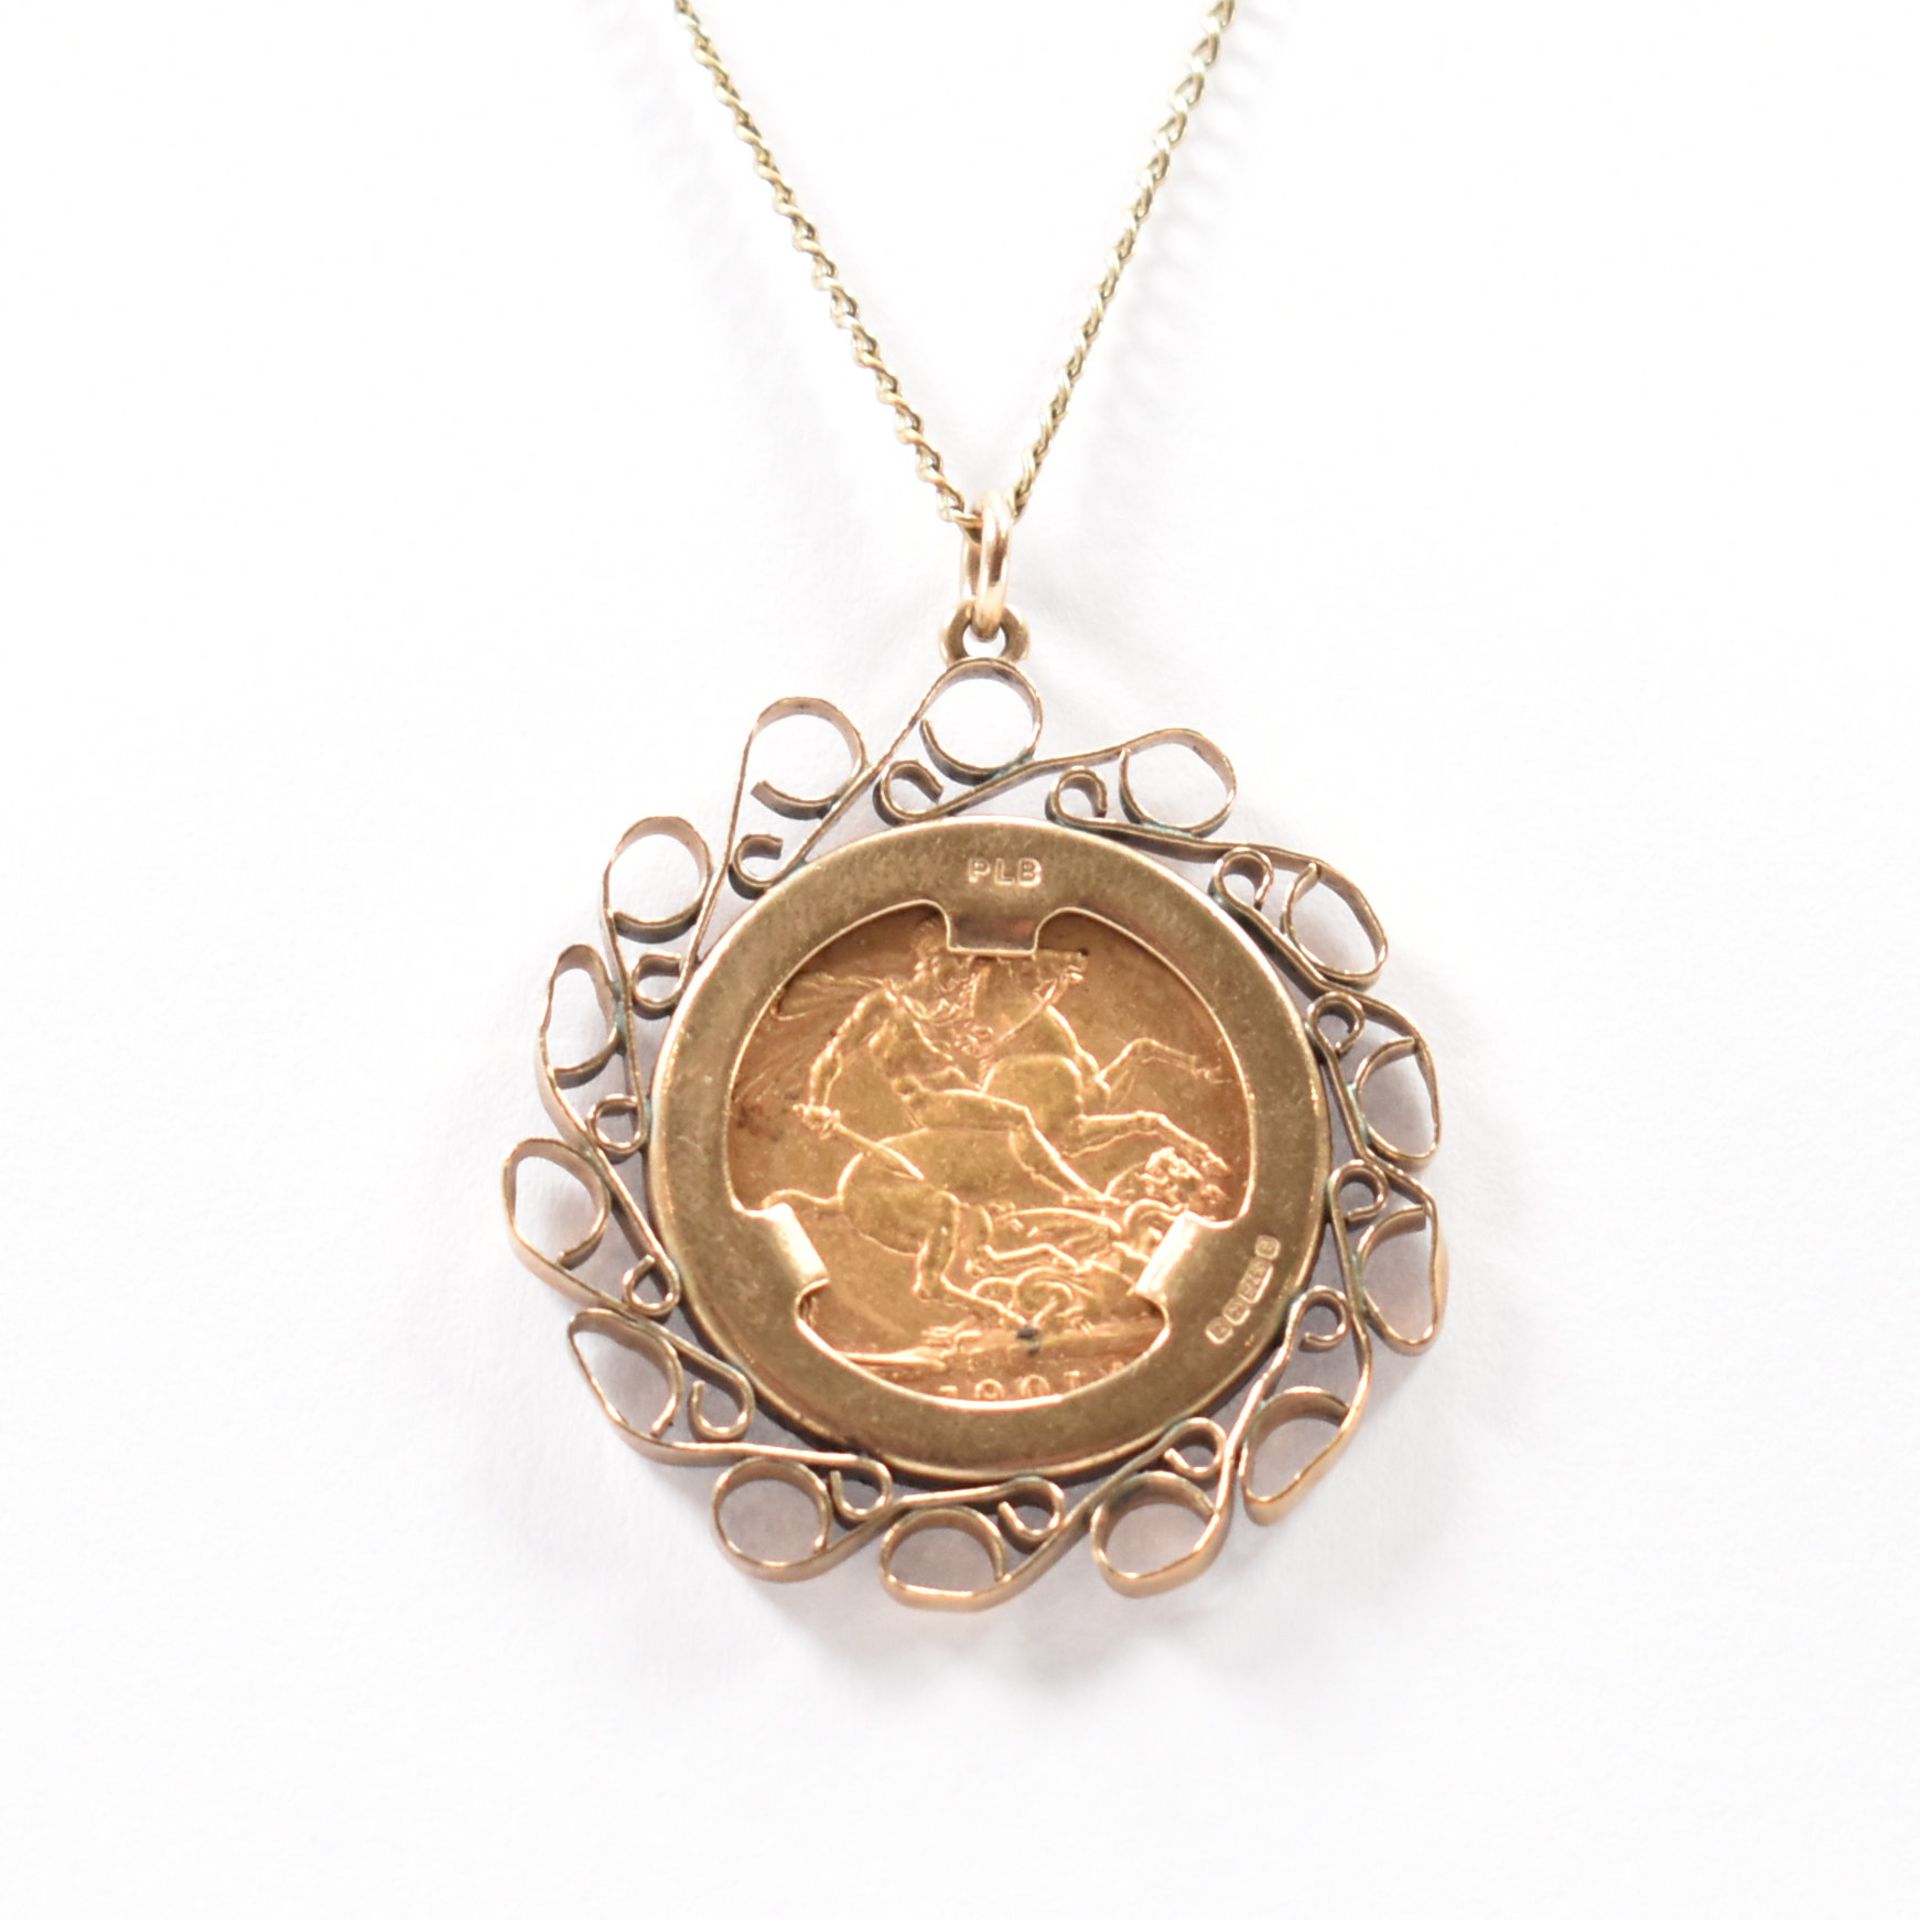 VICTORIAN GOLD SOVEREIGN CHAIN NECKLACE - Image 3 of 8